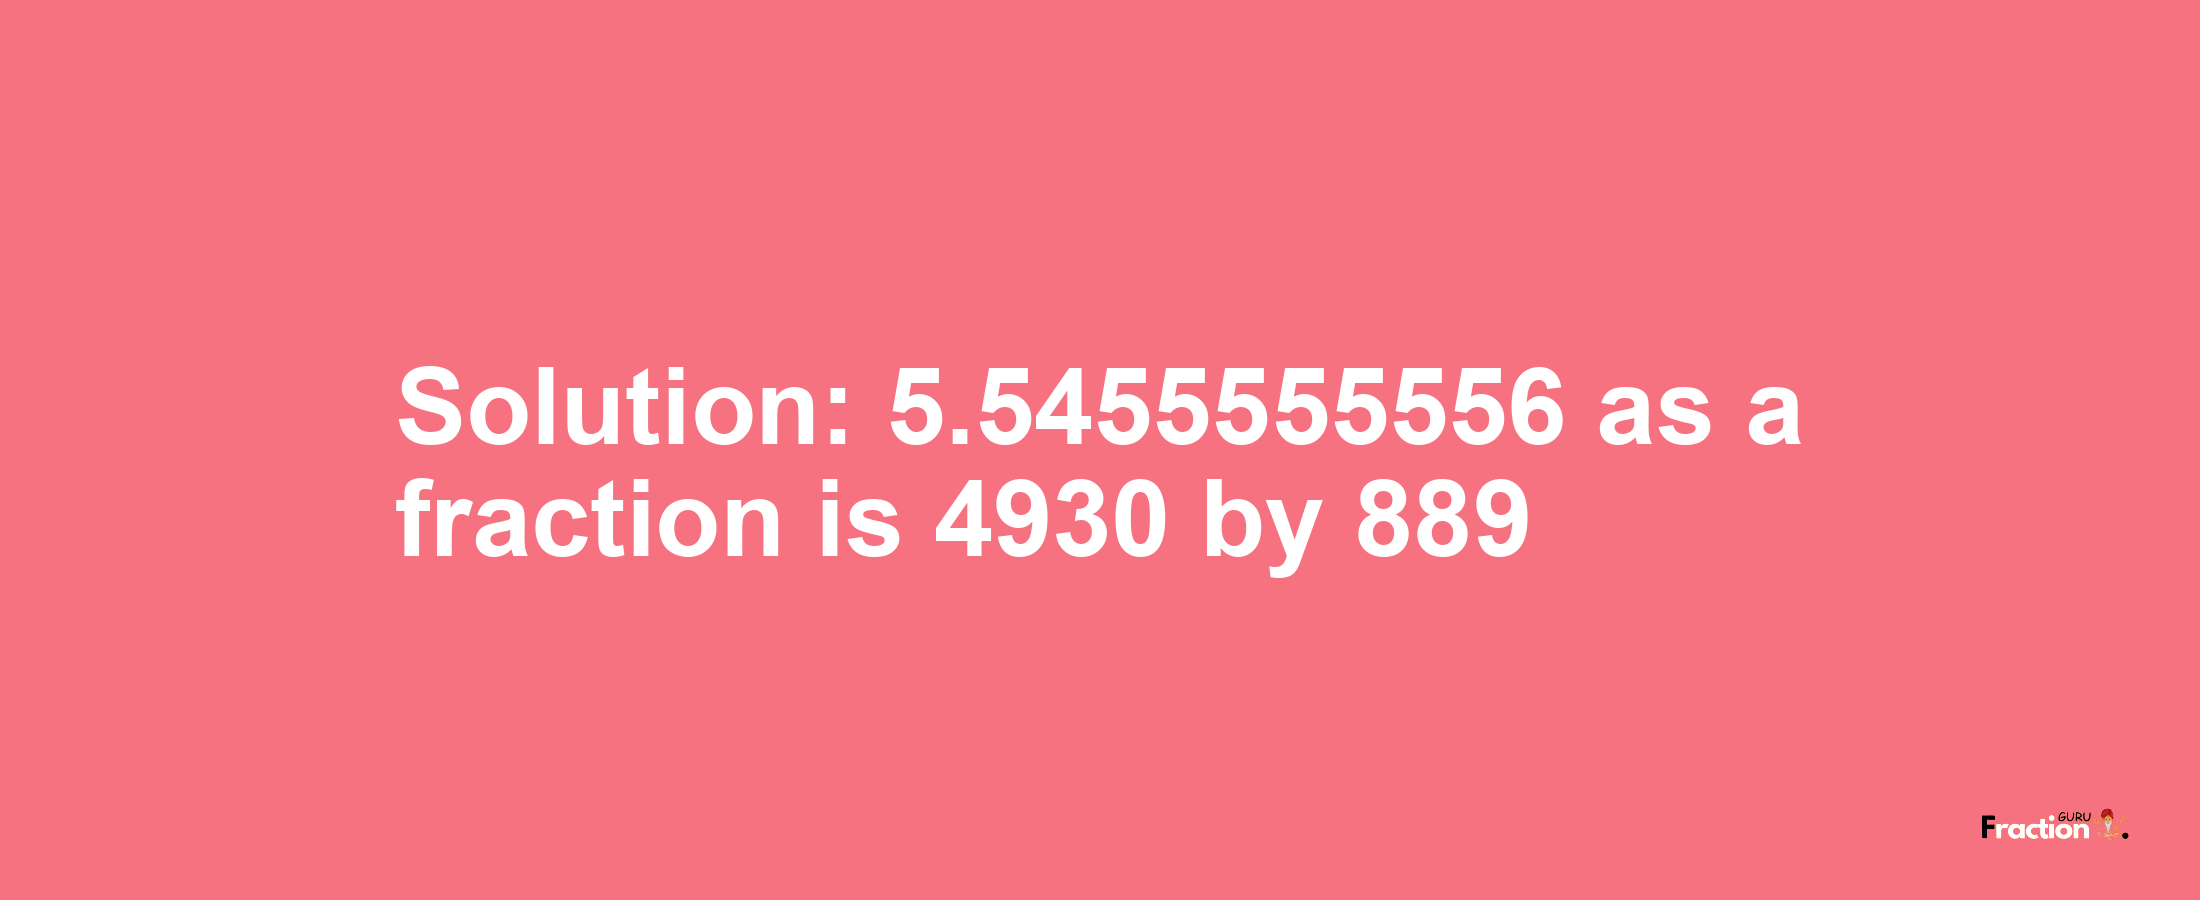 Solution:5.5455555556 as a fraction is 4930/889